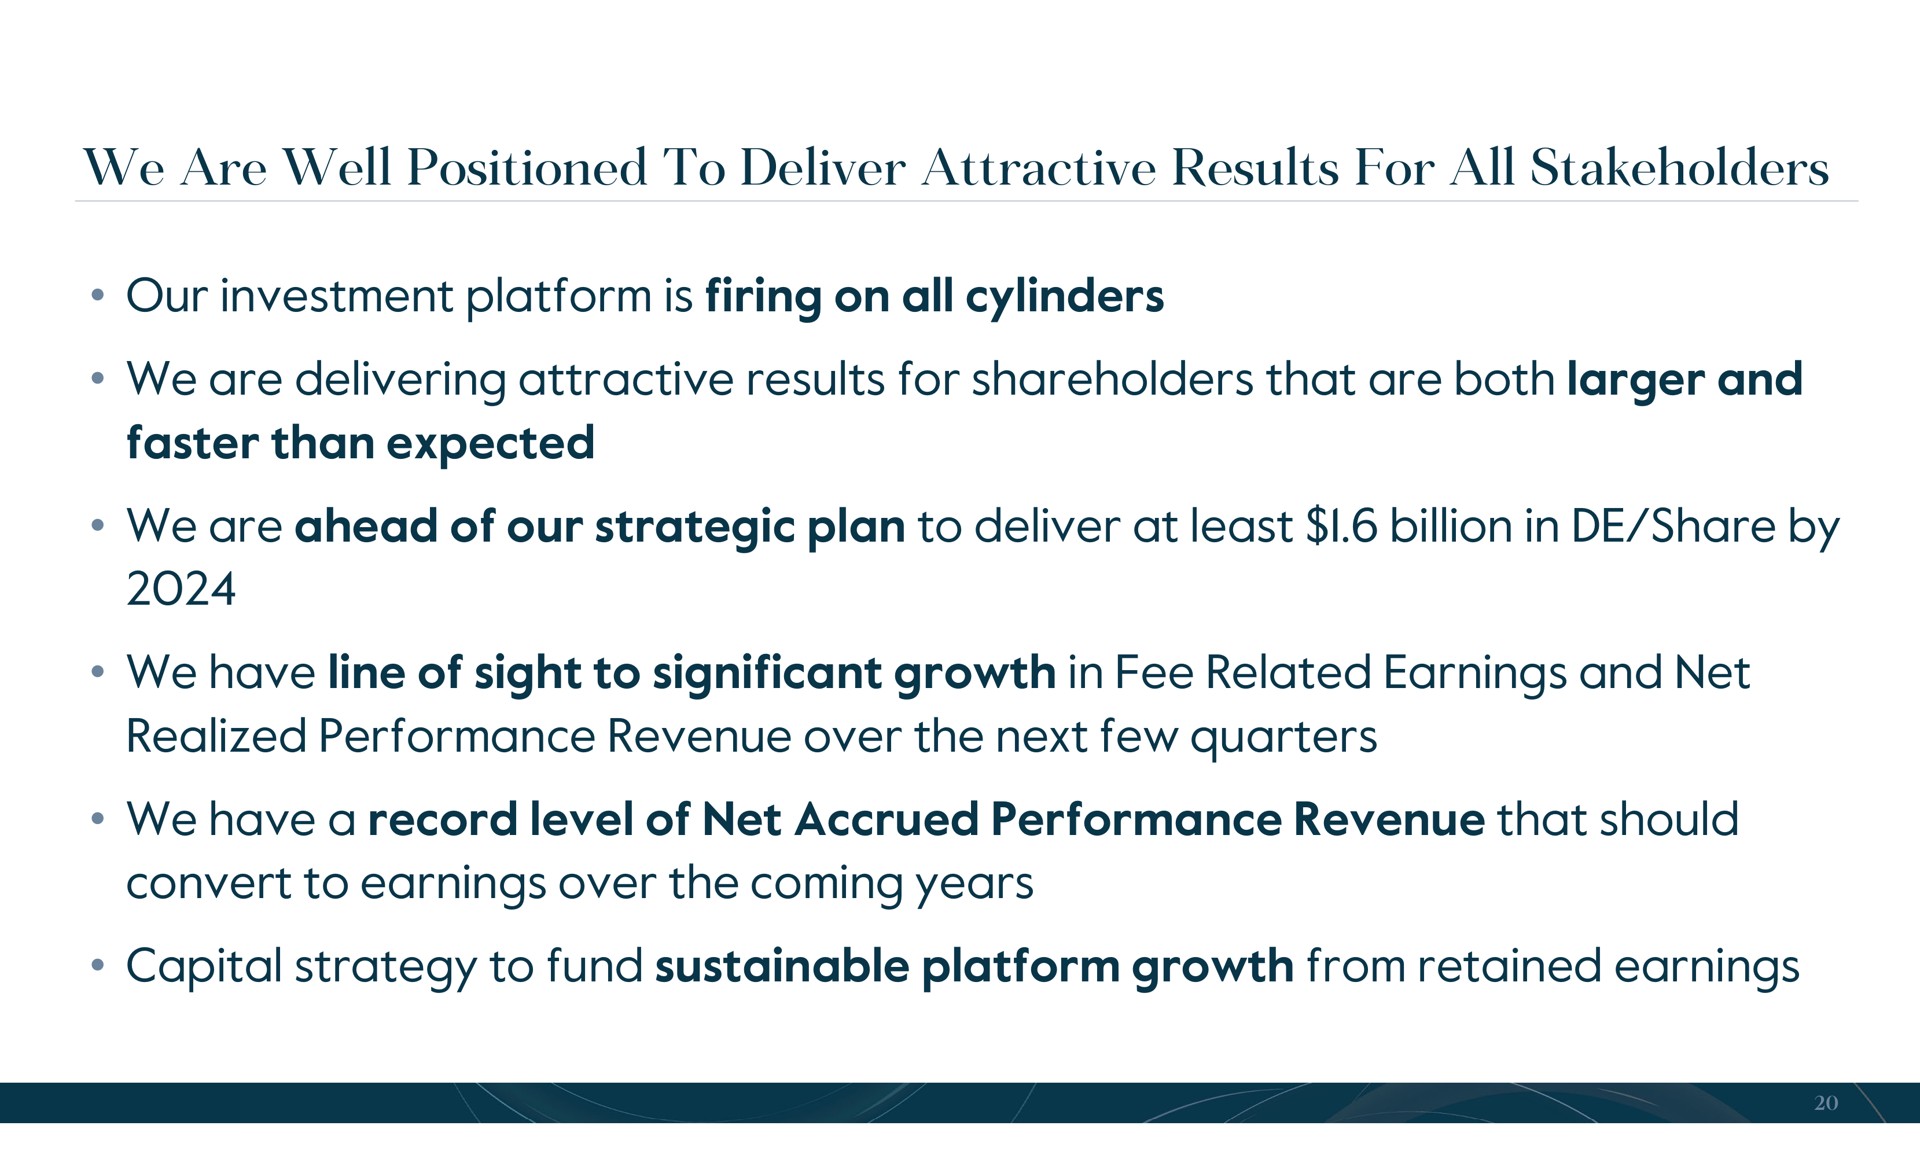 we are well positioned to deliver attractive results for all stakeholders our investment platform is firing on all cylinders we are delivering attractive results for shareholders that are both and faster than expected we are ahead of our strategic plan to deliver at least billion in share by we have line of sight to significant growth in fee related earnings and net realized performance revenue over the next few quarters we have a record level of net accrued performance revenue that should convert to earnings over the coming years capital strategy to fund sustainable platform growth from retained earnings | Carlyle